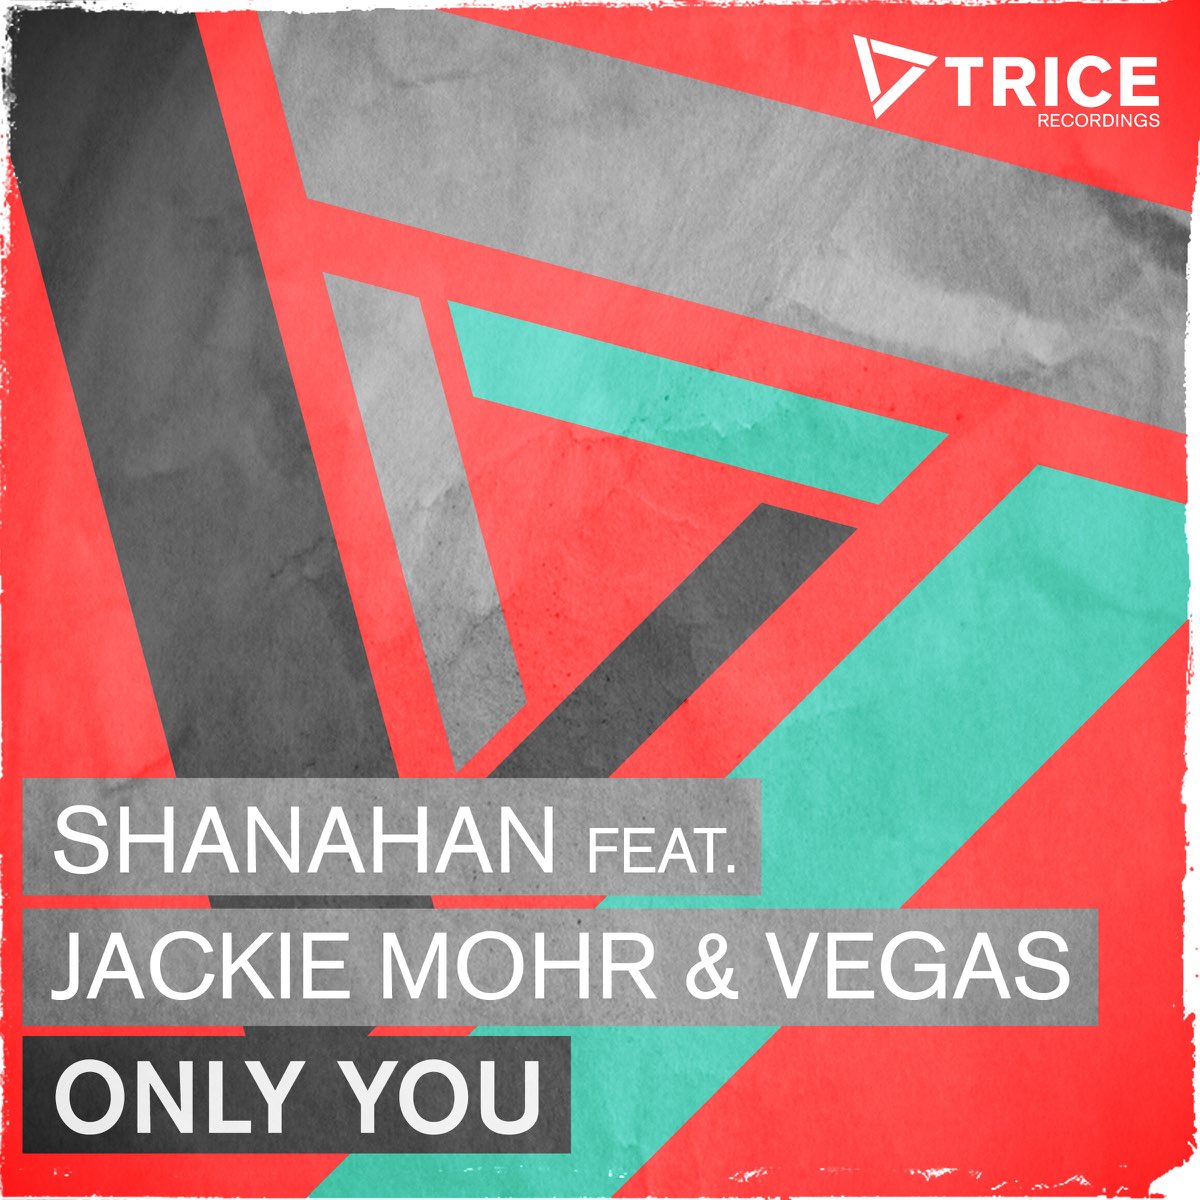 Away only you. Trice recordings. Обложка трека only you. The only Vegas. Обложка альбома a.k. Style Project - only you.